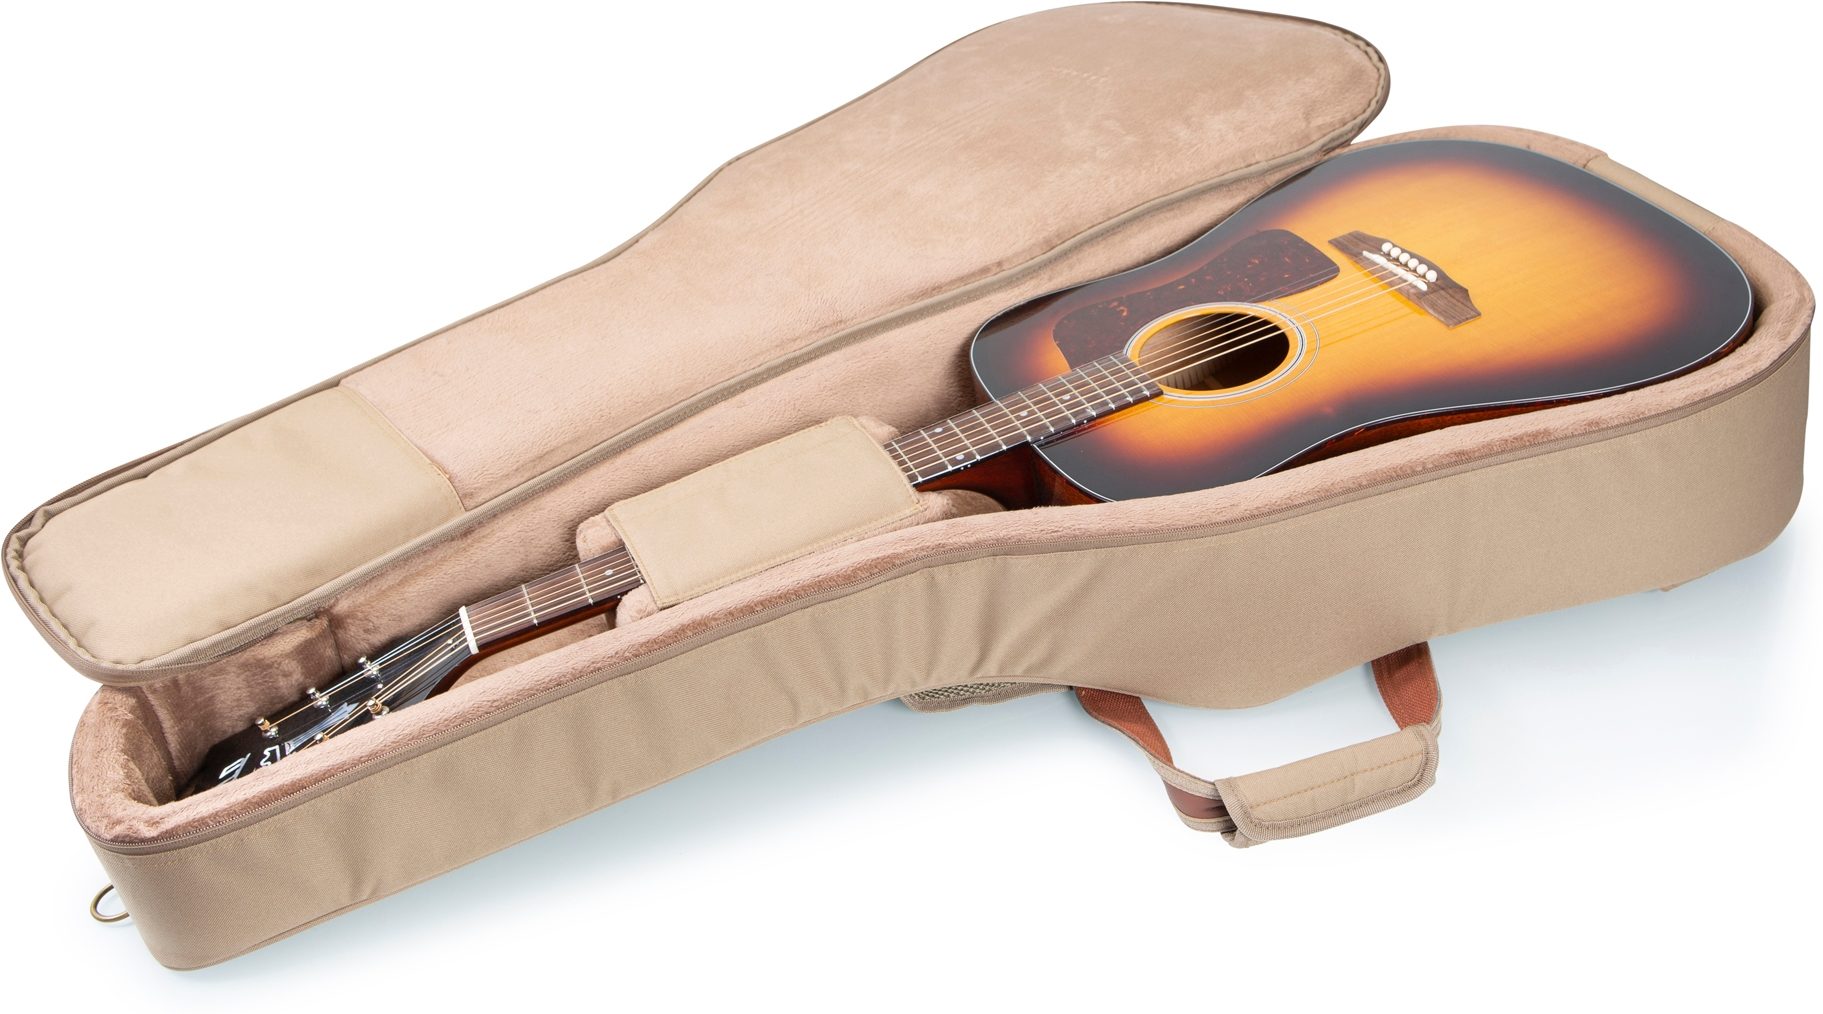 Levy's 200 Series Deluxe Dreadnought Acoustic Guitar Gig Bag